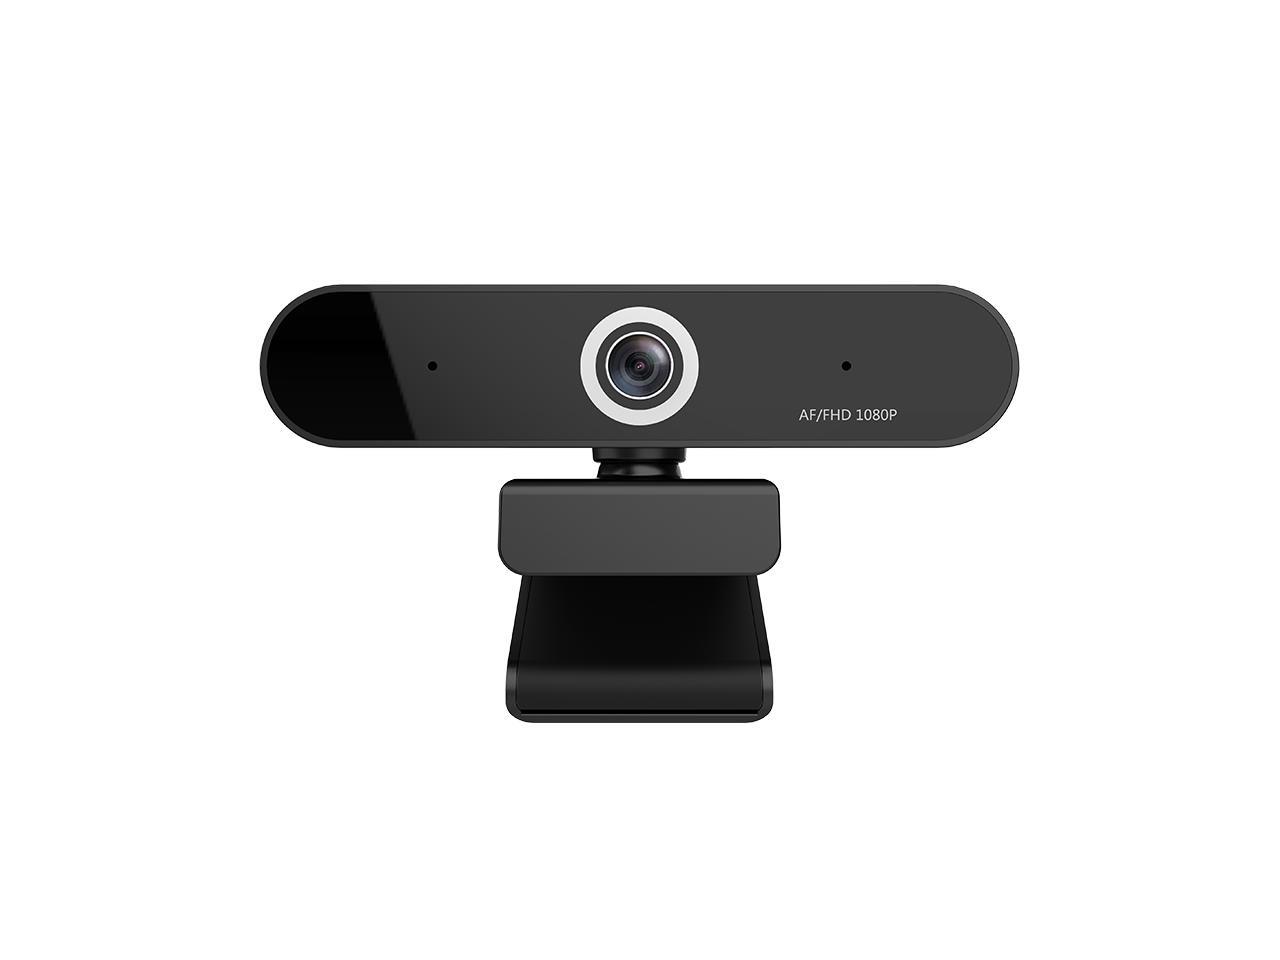 HD Auto Focus Camera 5 Megapixel 1080P Video Call Available Pro Streaming Web Camera with Microphone Widescreen USB Computer Camera for PC Mac Laptop Desktop Video Calling Conferencing Recording 